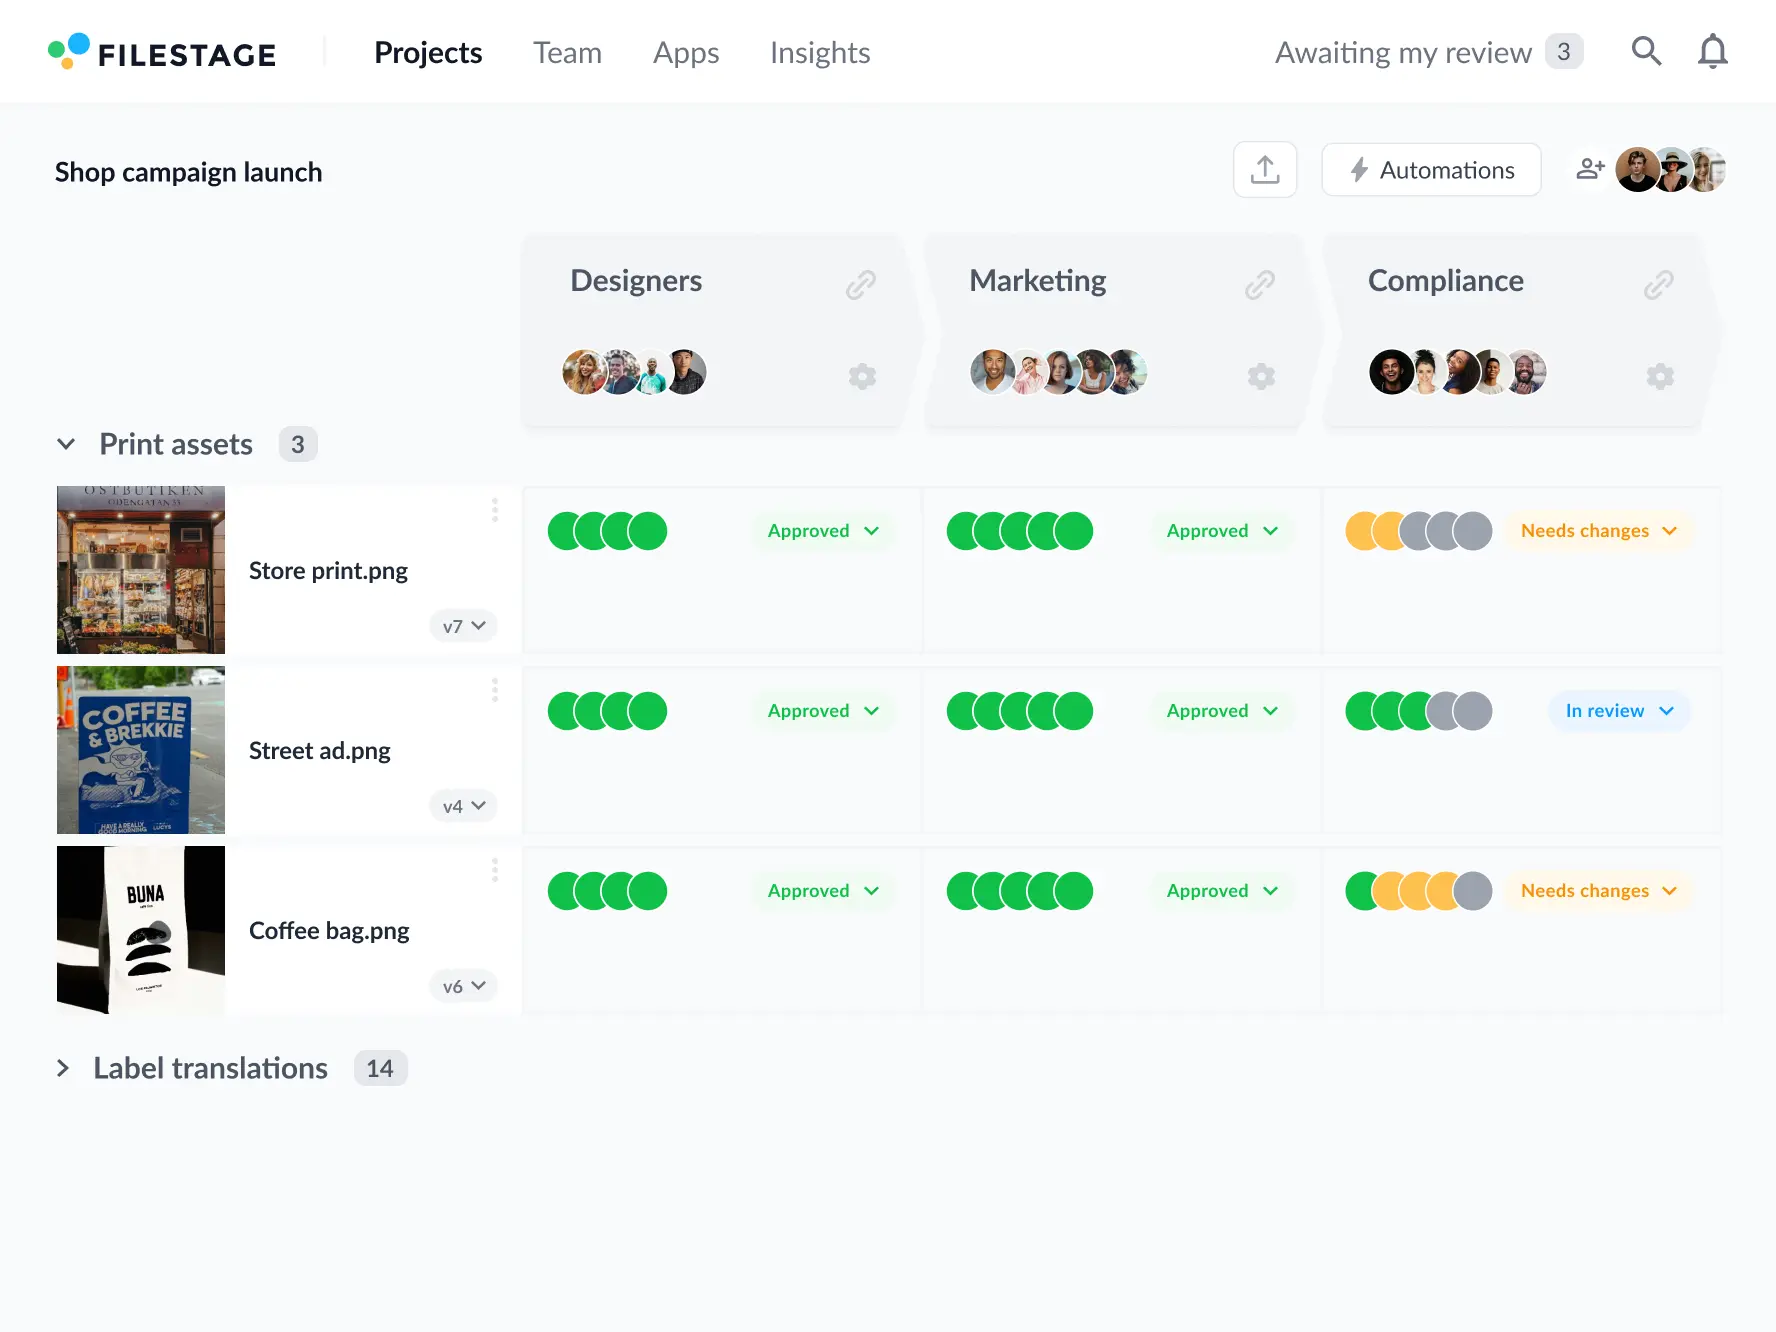 manage your files, feedback, and stakeholders in one place